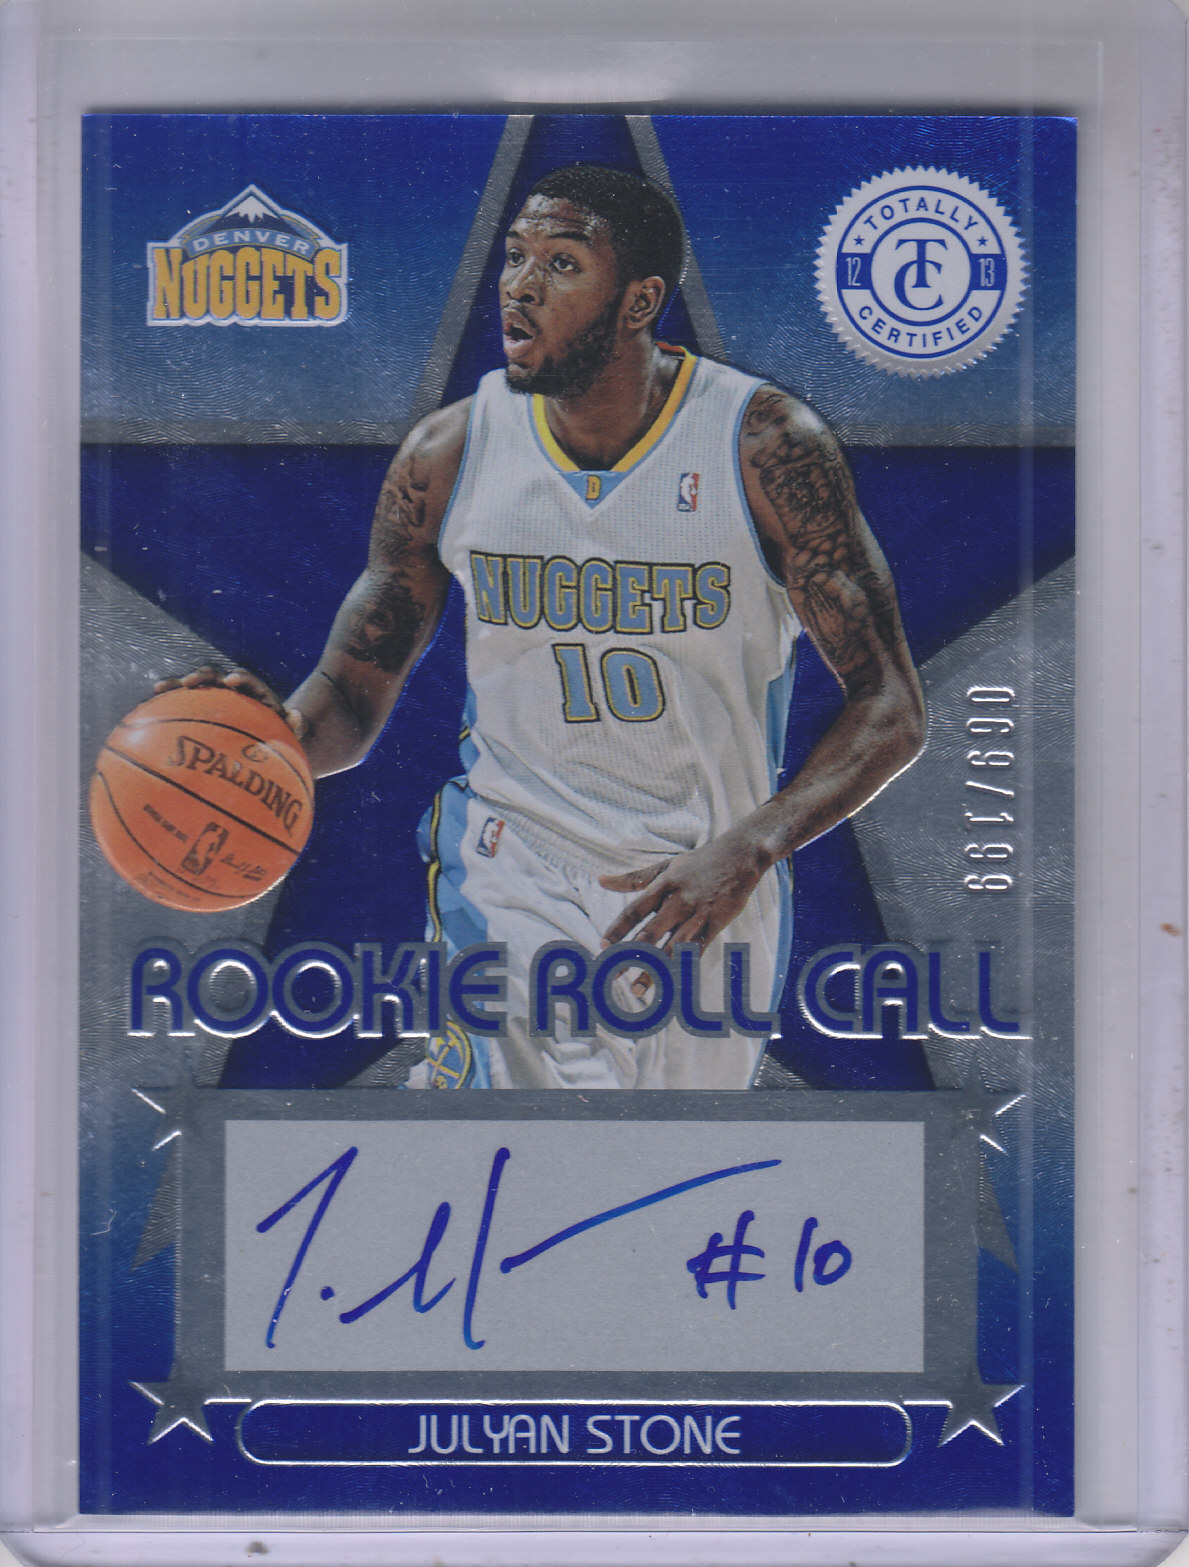 2012-13 Totally Certified Rookie Roll Call Autographs Blue #47 Julyan Stone/199